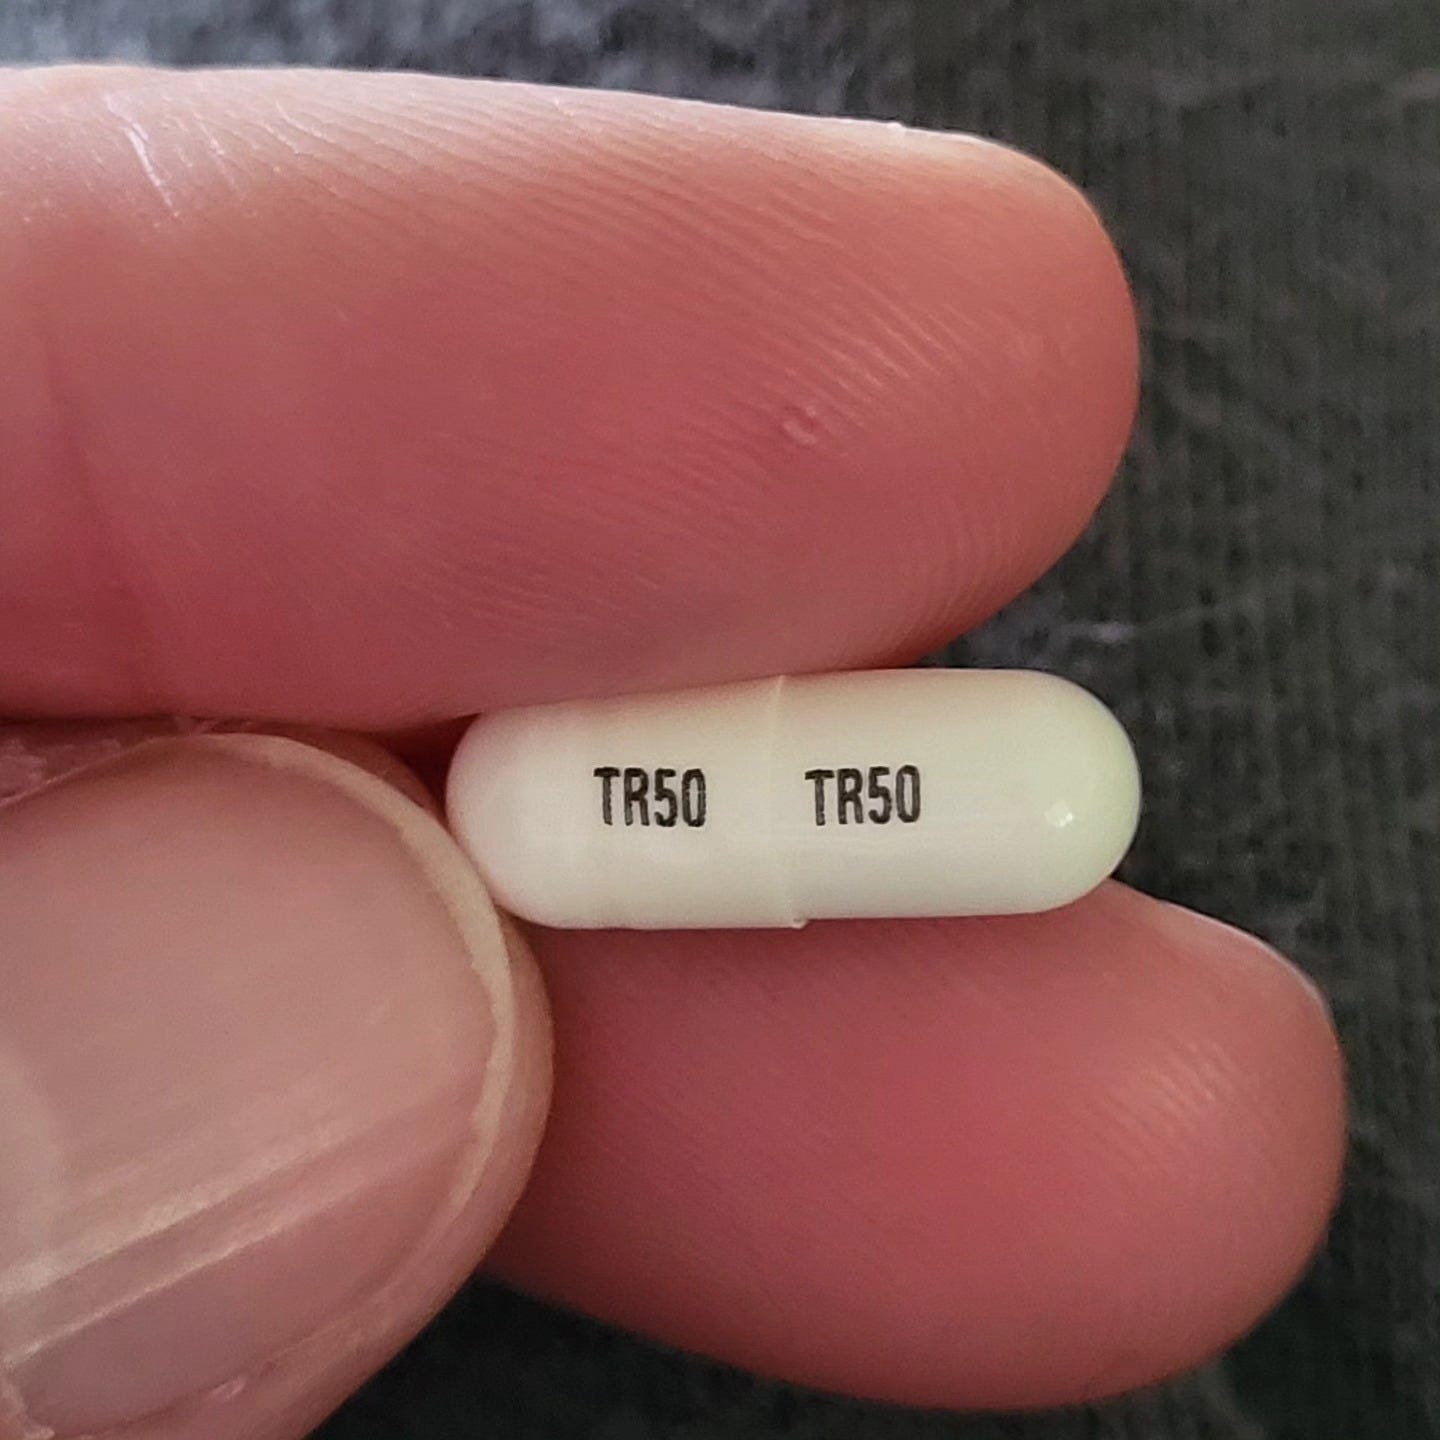 Fingers holding a tiny white medication capsule with T50 written on it in black.